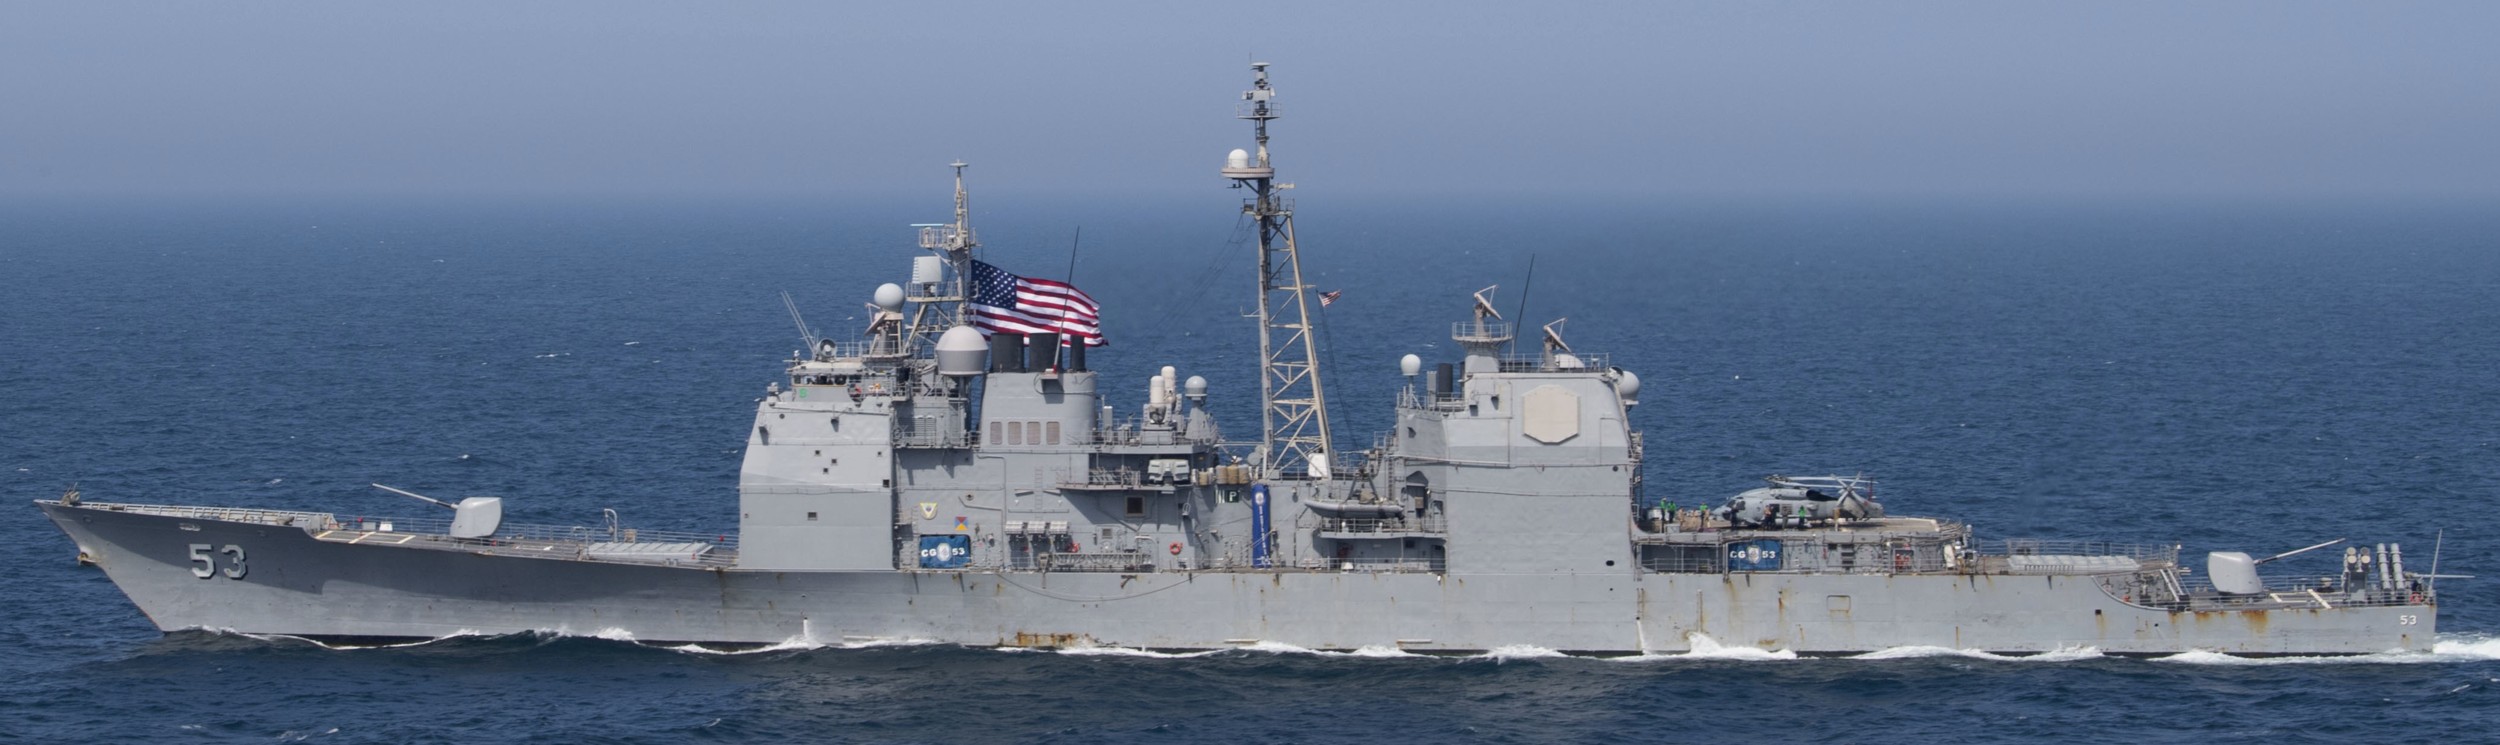 cg-53 uss mobile bay ticonderoga class guided missile cruiser aegis us navy 144